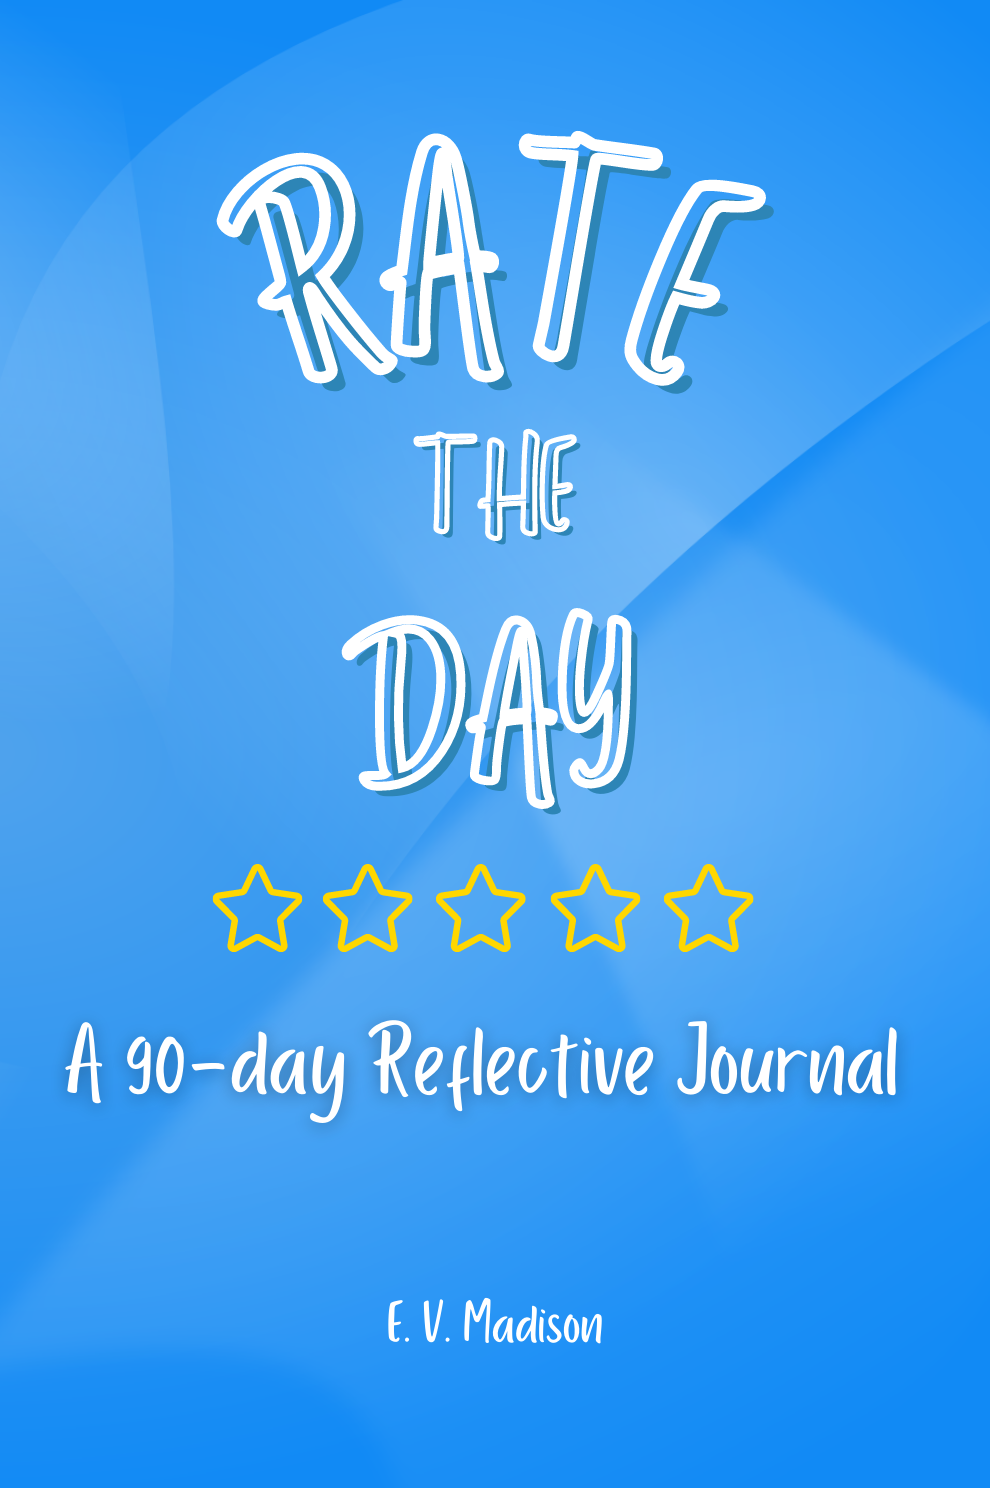 Rate the Day: A 90-Day Reflective Journal - True Blue Edition